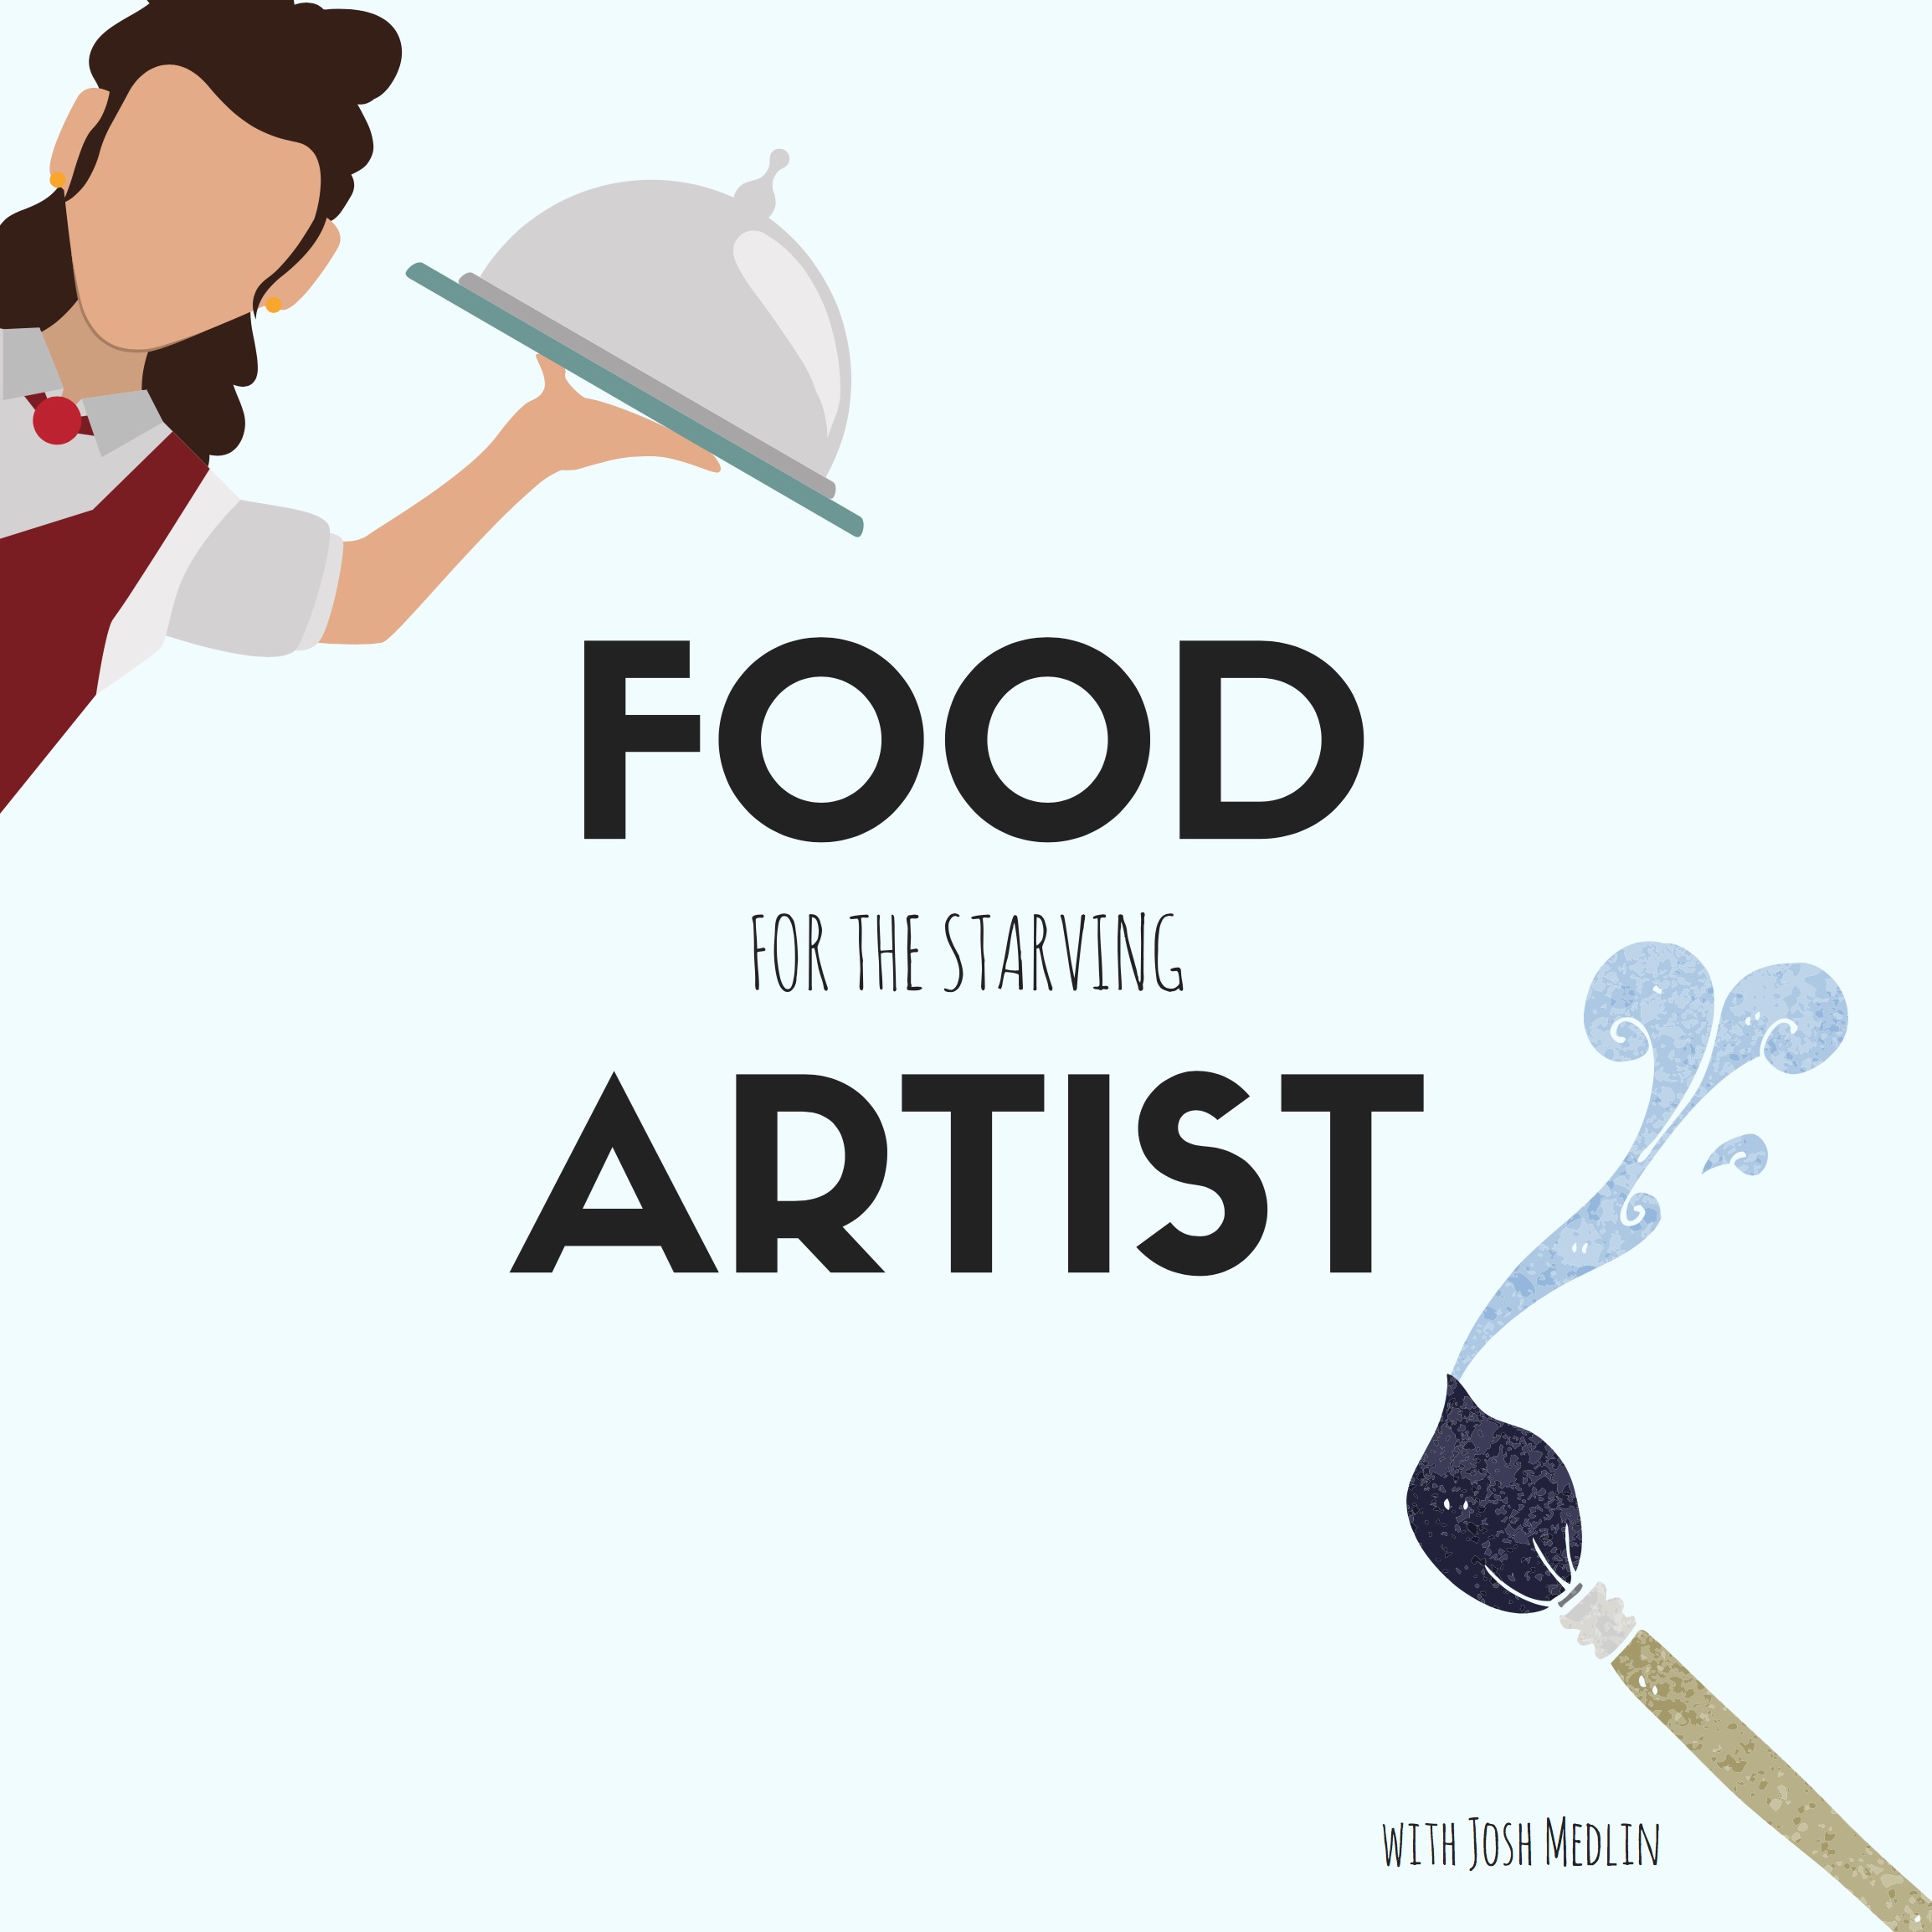 Food for the Starving Artist: how to make money creating art!